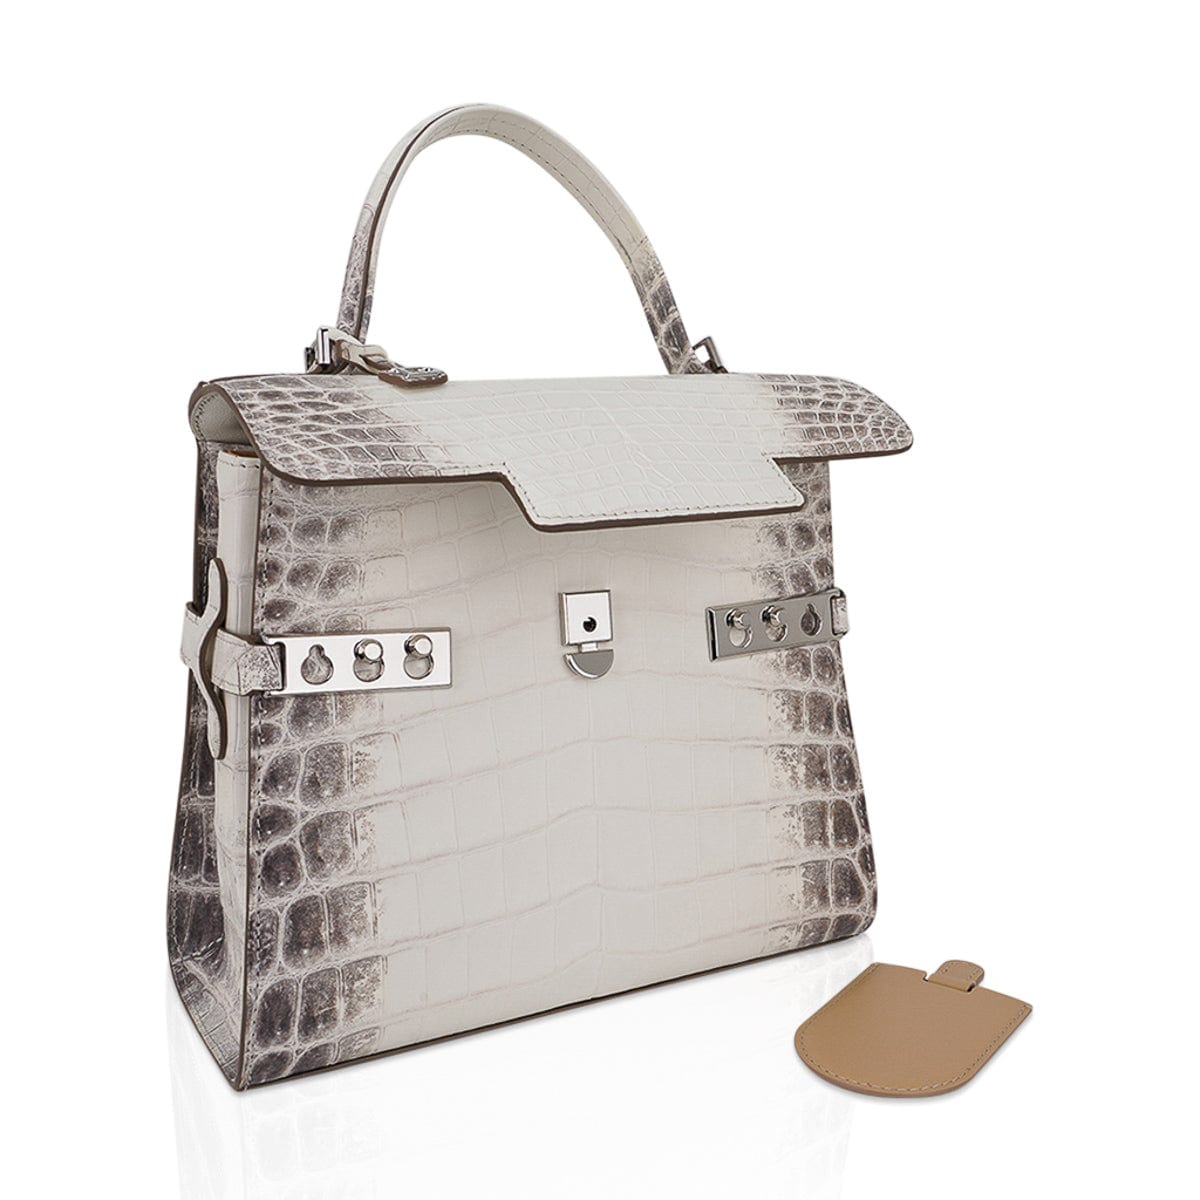 Delvaux Tempete PM Himalaya Crocodile Limited Edition • MIGHTYCHIC • 